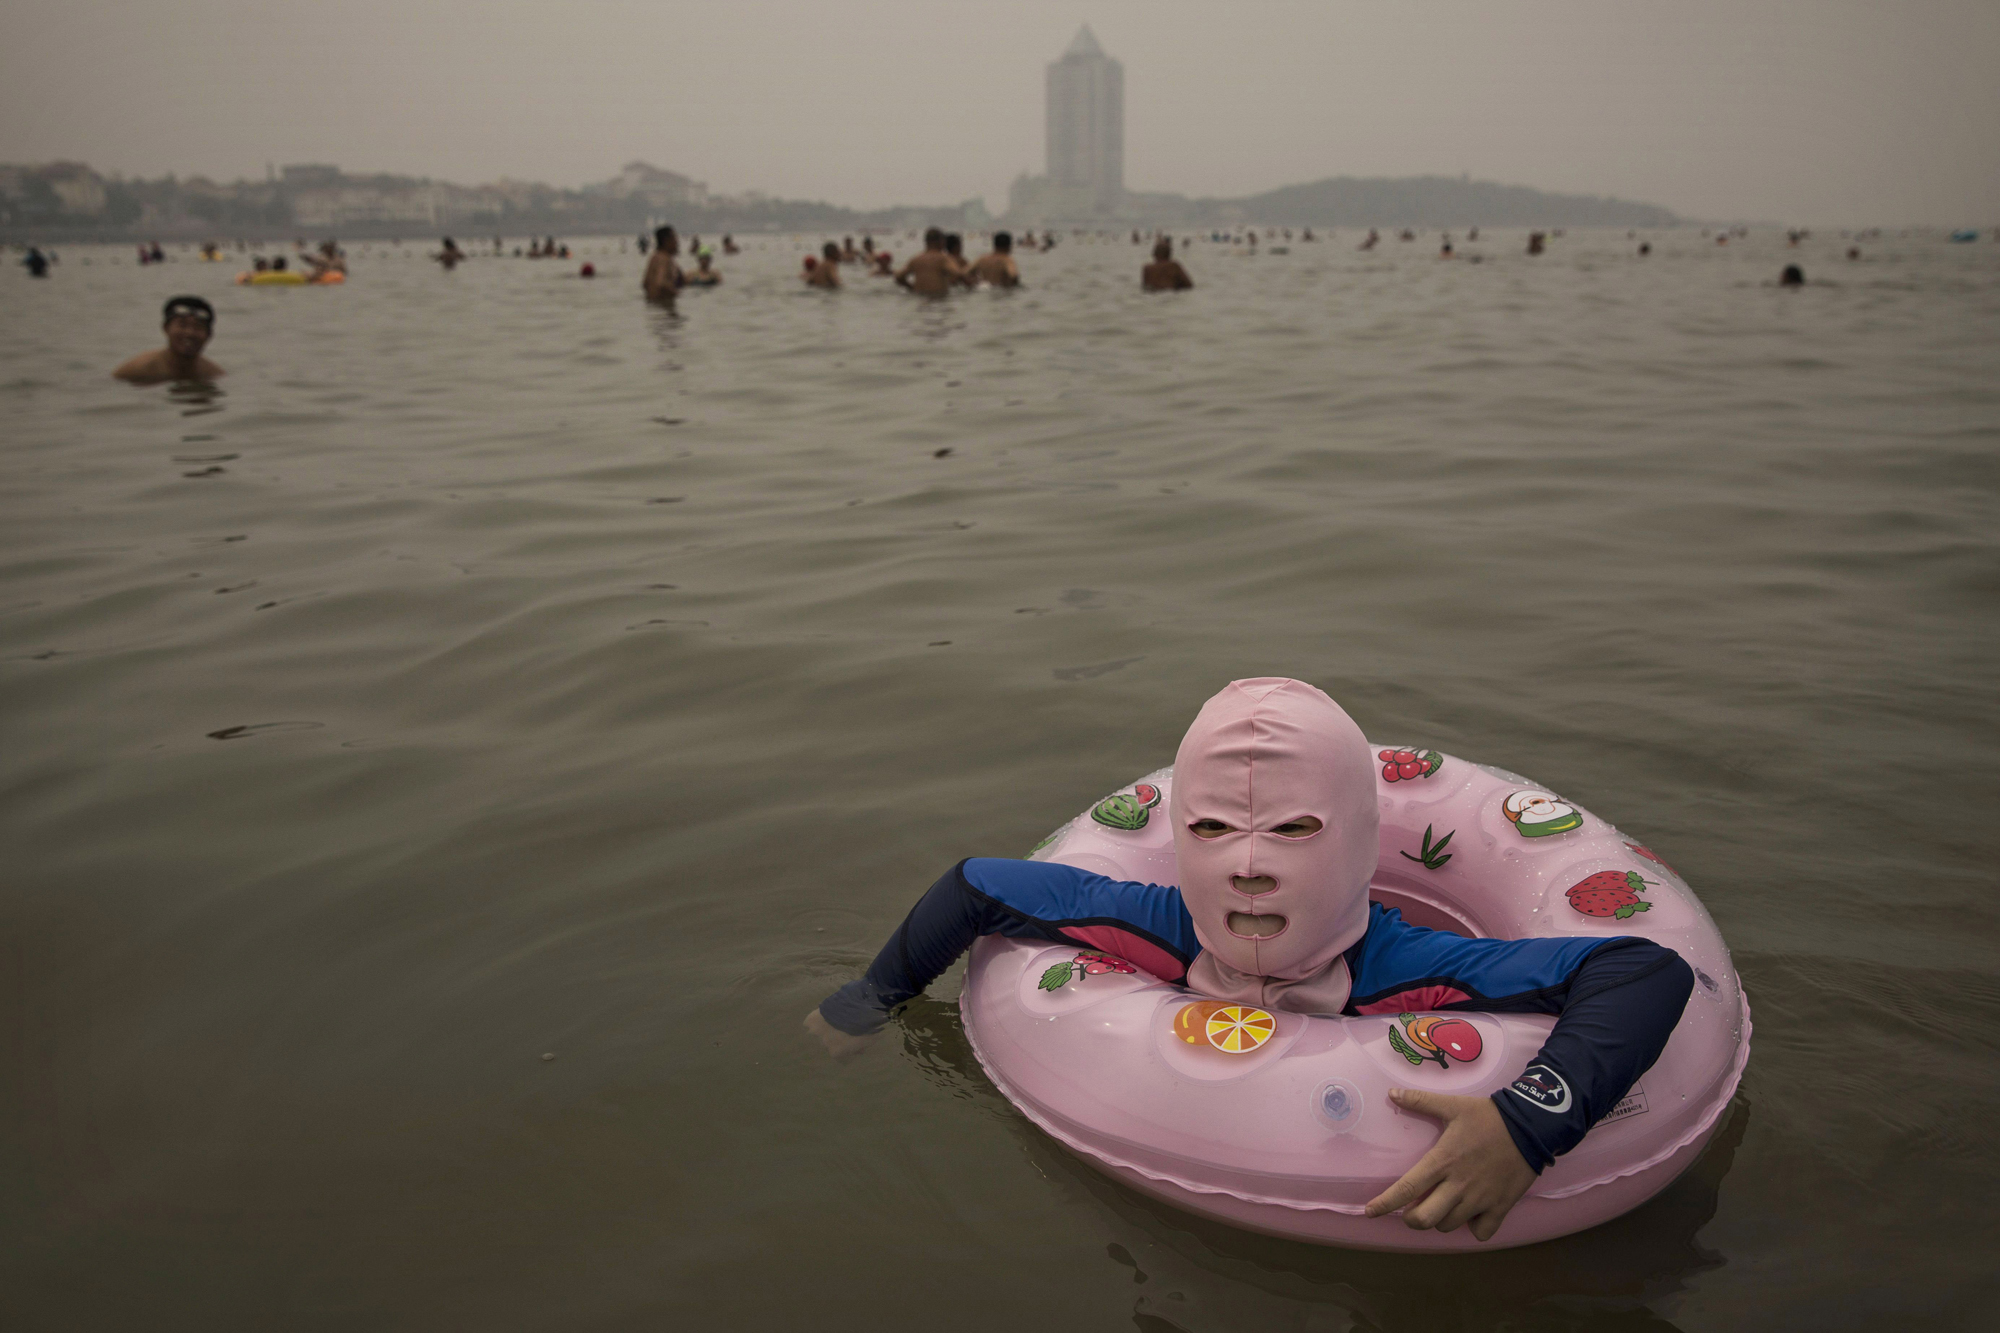 A Chinese girl wears a face-kini as she floats in the water on August 21, 2014 on the Yellow Sea in Qingdao.